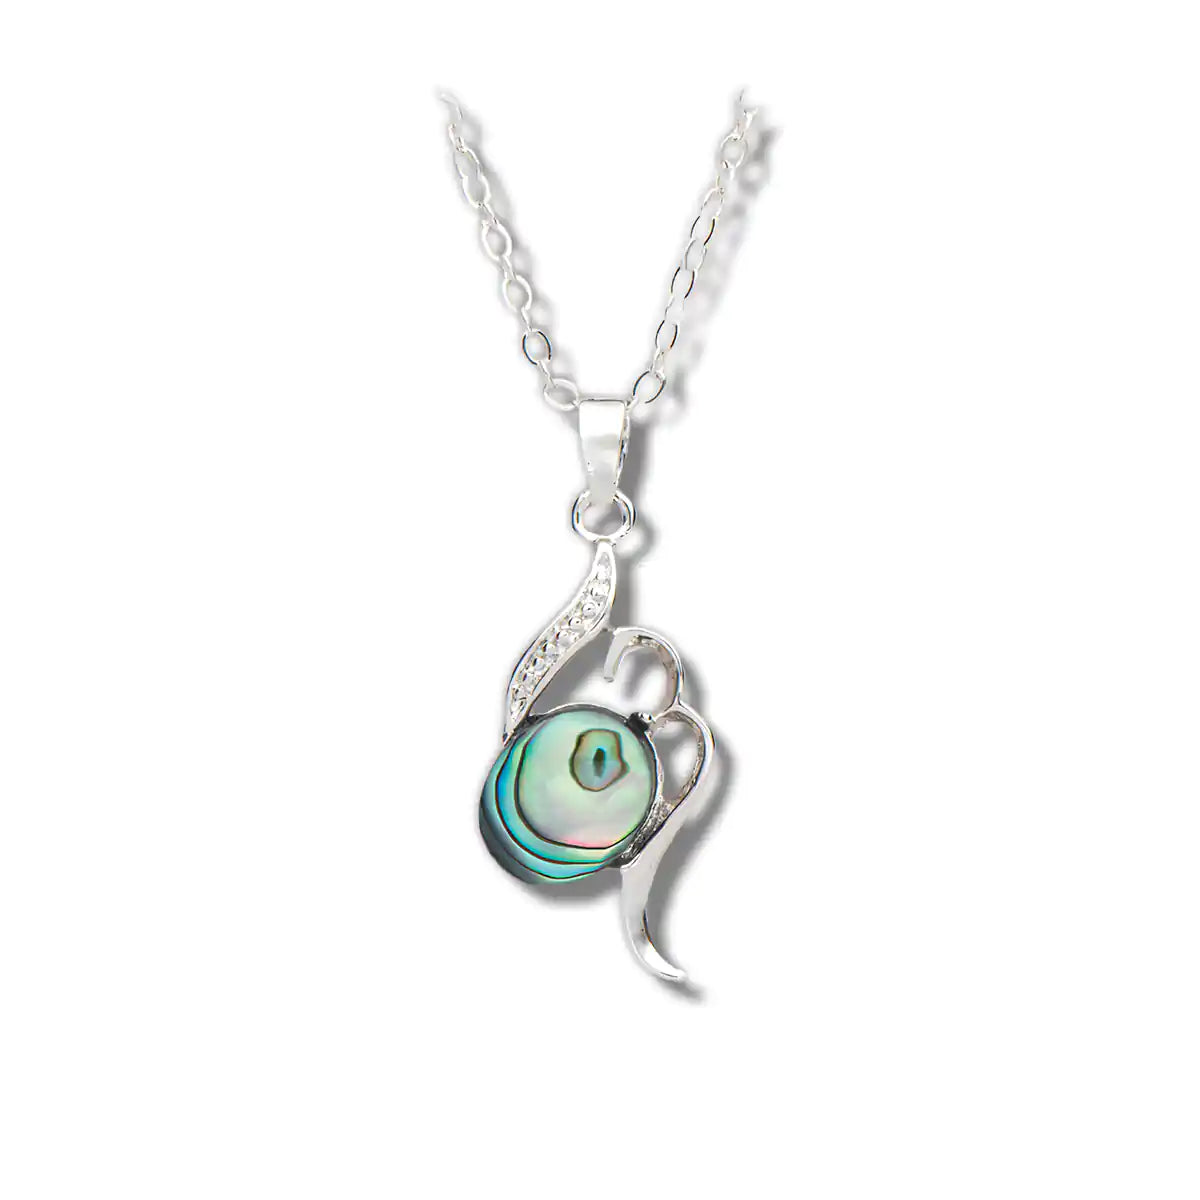 Glacier pearle mystery necklace